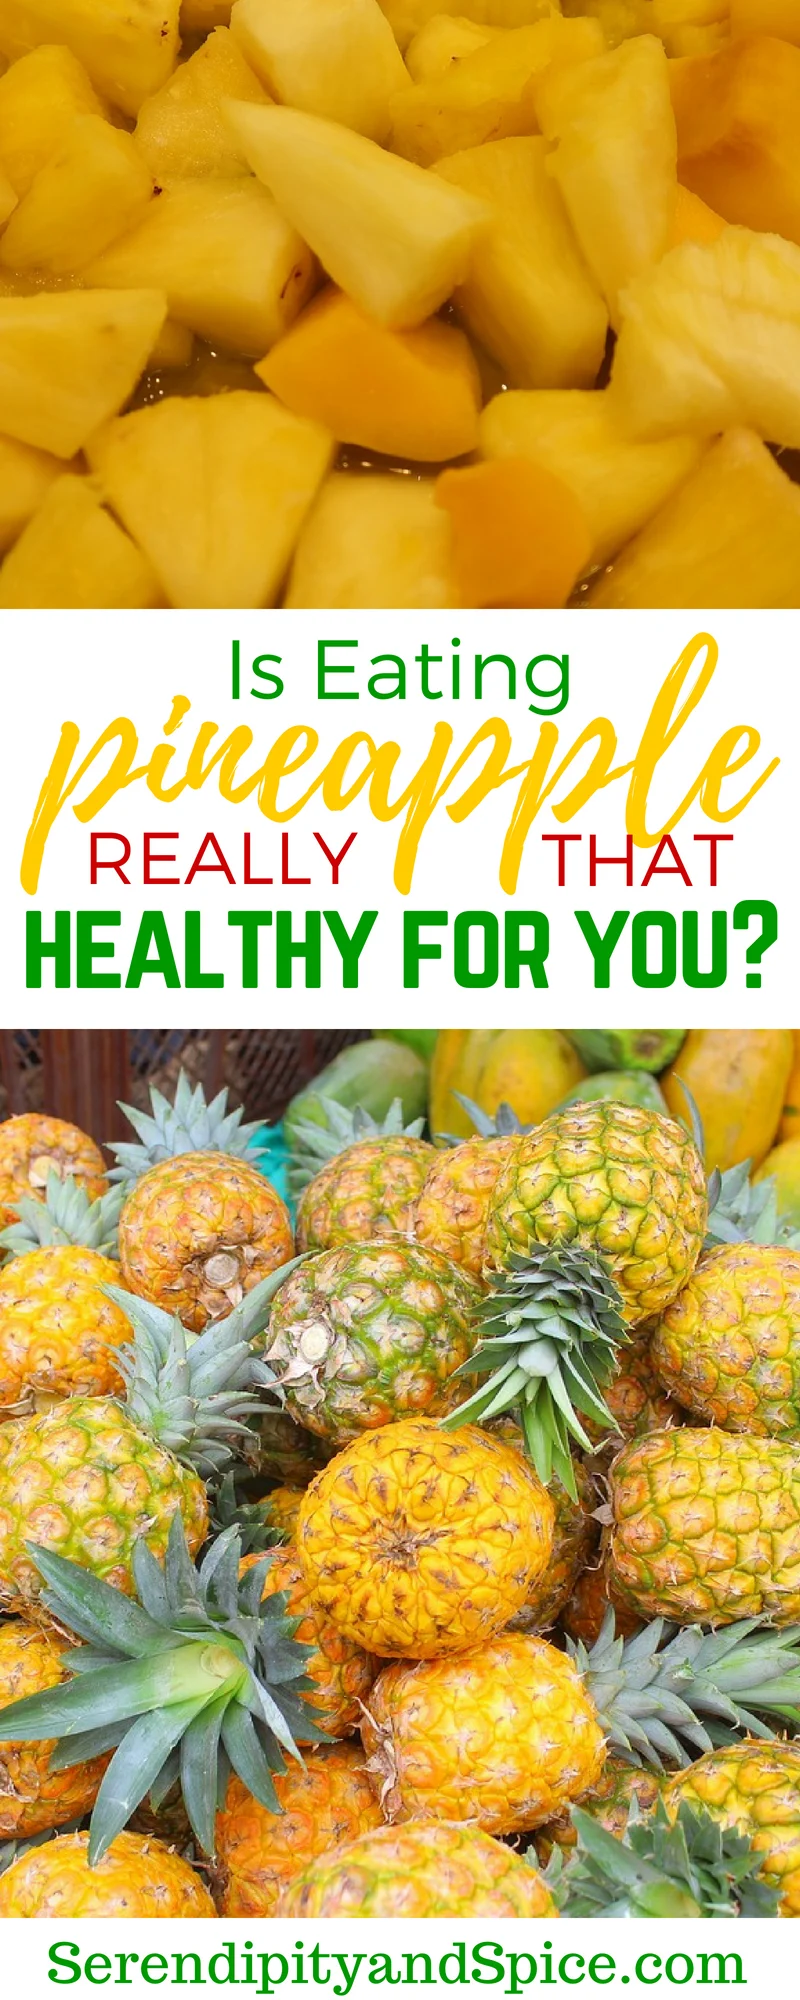 is pineapple healthy Is Pineapple Good For You Is pineapple good for you? Sure it's sweet and delicious but what exactly are the health benefits of pineapples? Can eating pineapple increase your health? Does pineapple have any real health benefits?